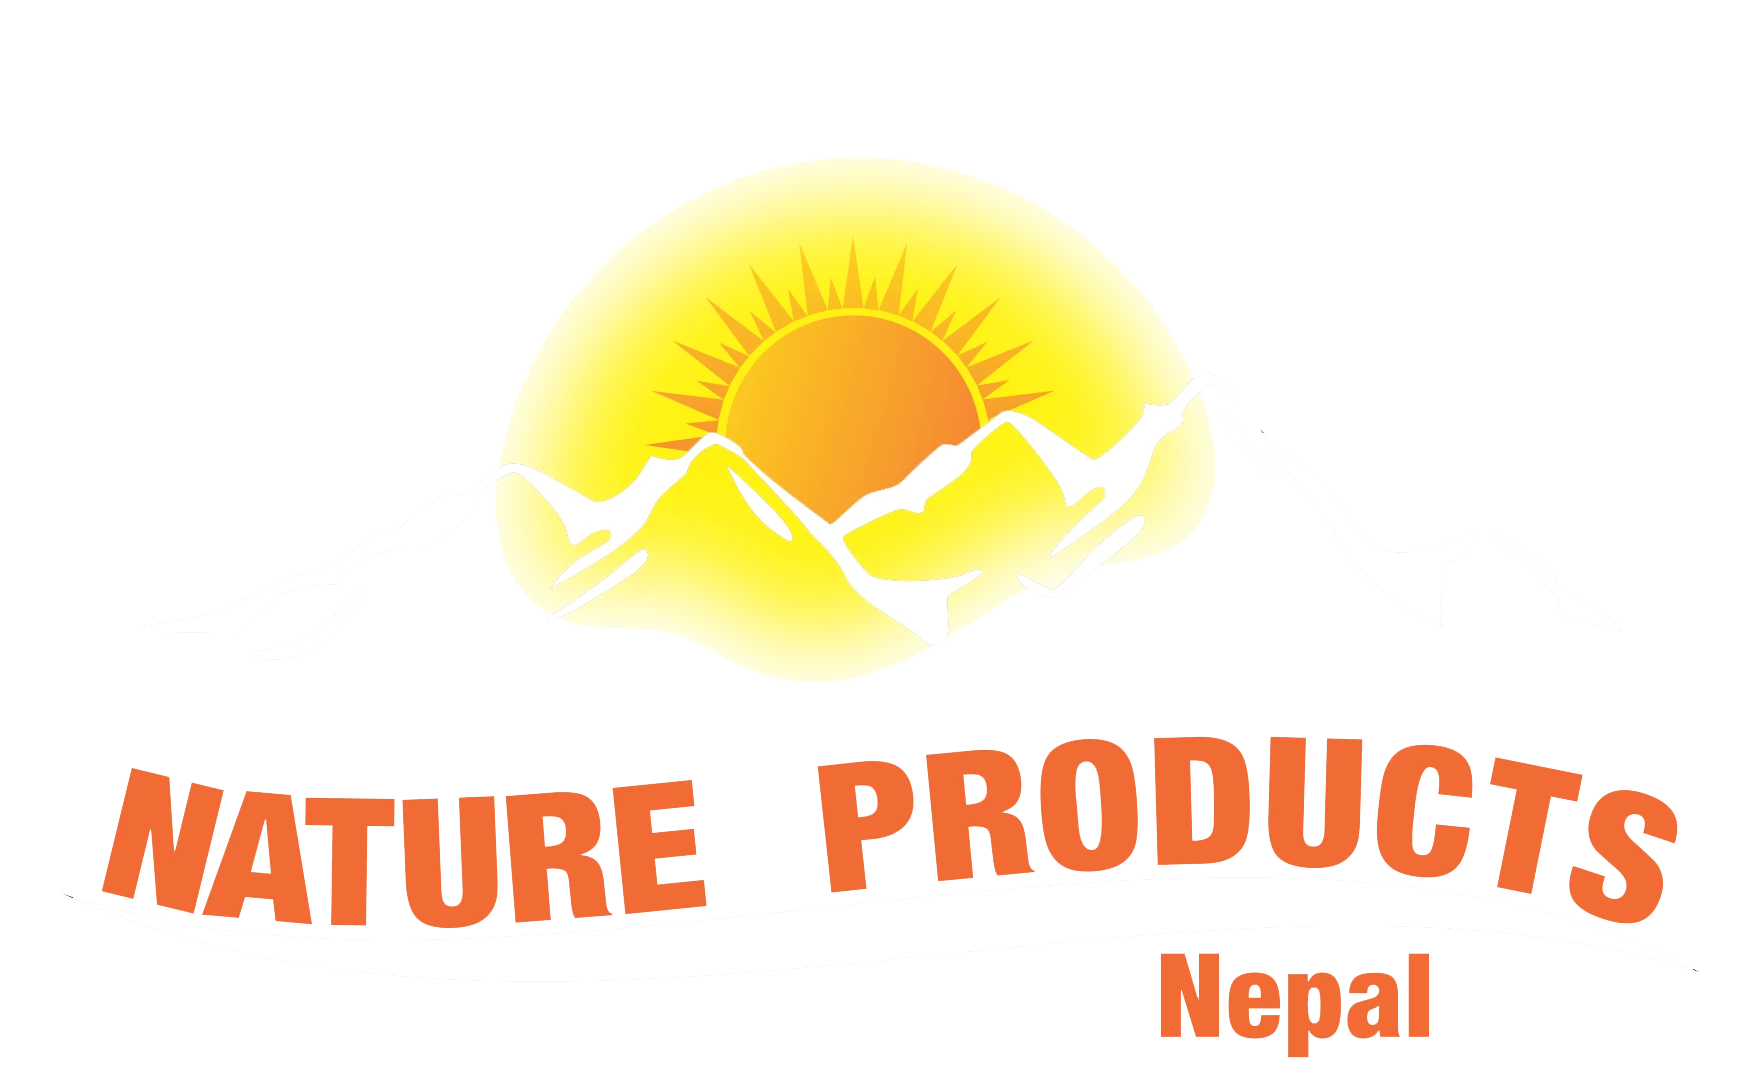 Nature Product